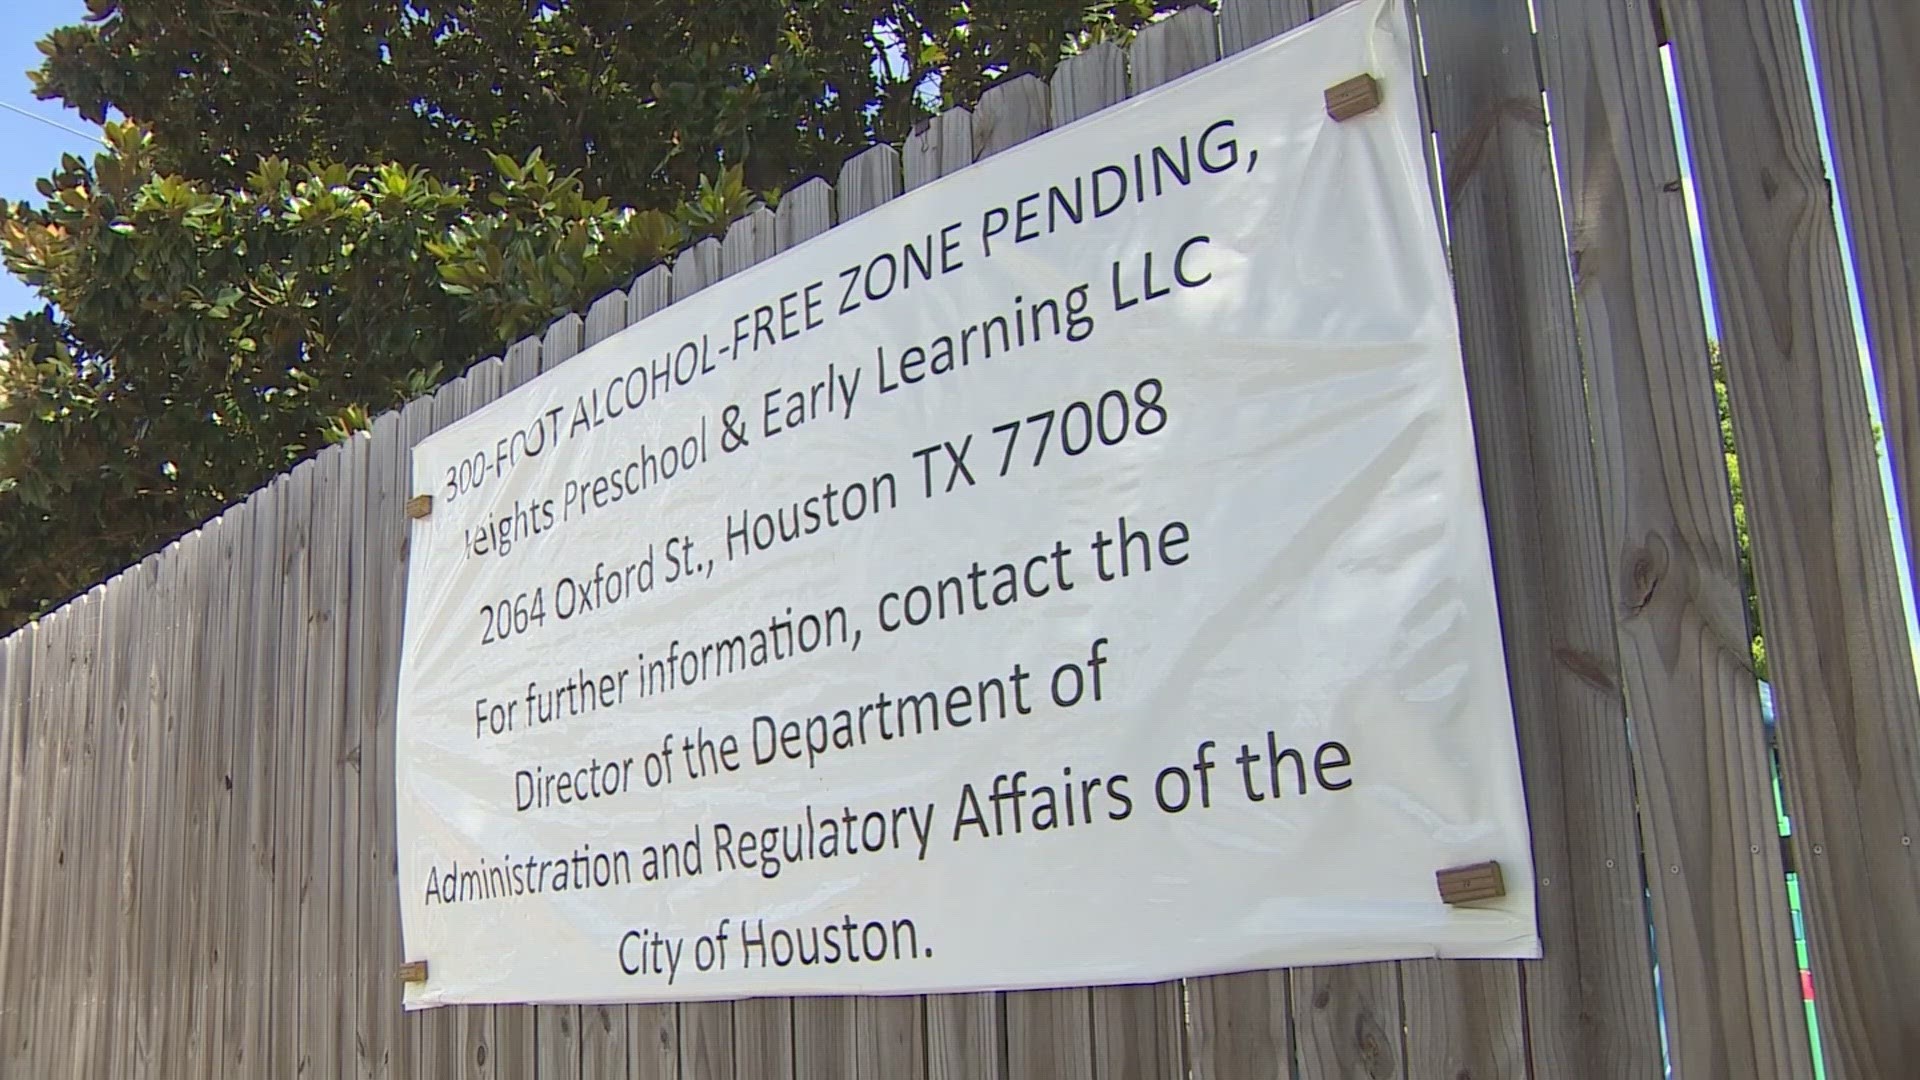 On Wednesday, Houston City Council is voting on what could become the first alcohol-free zone around a daycare or childcare facility in the city.